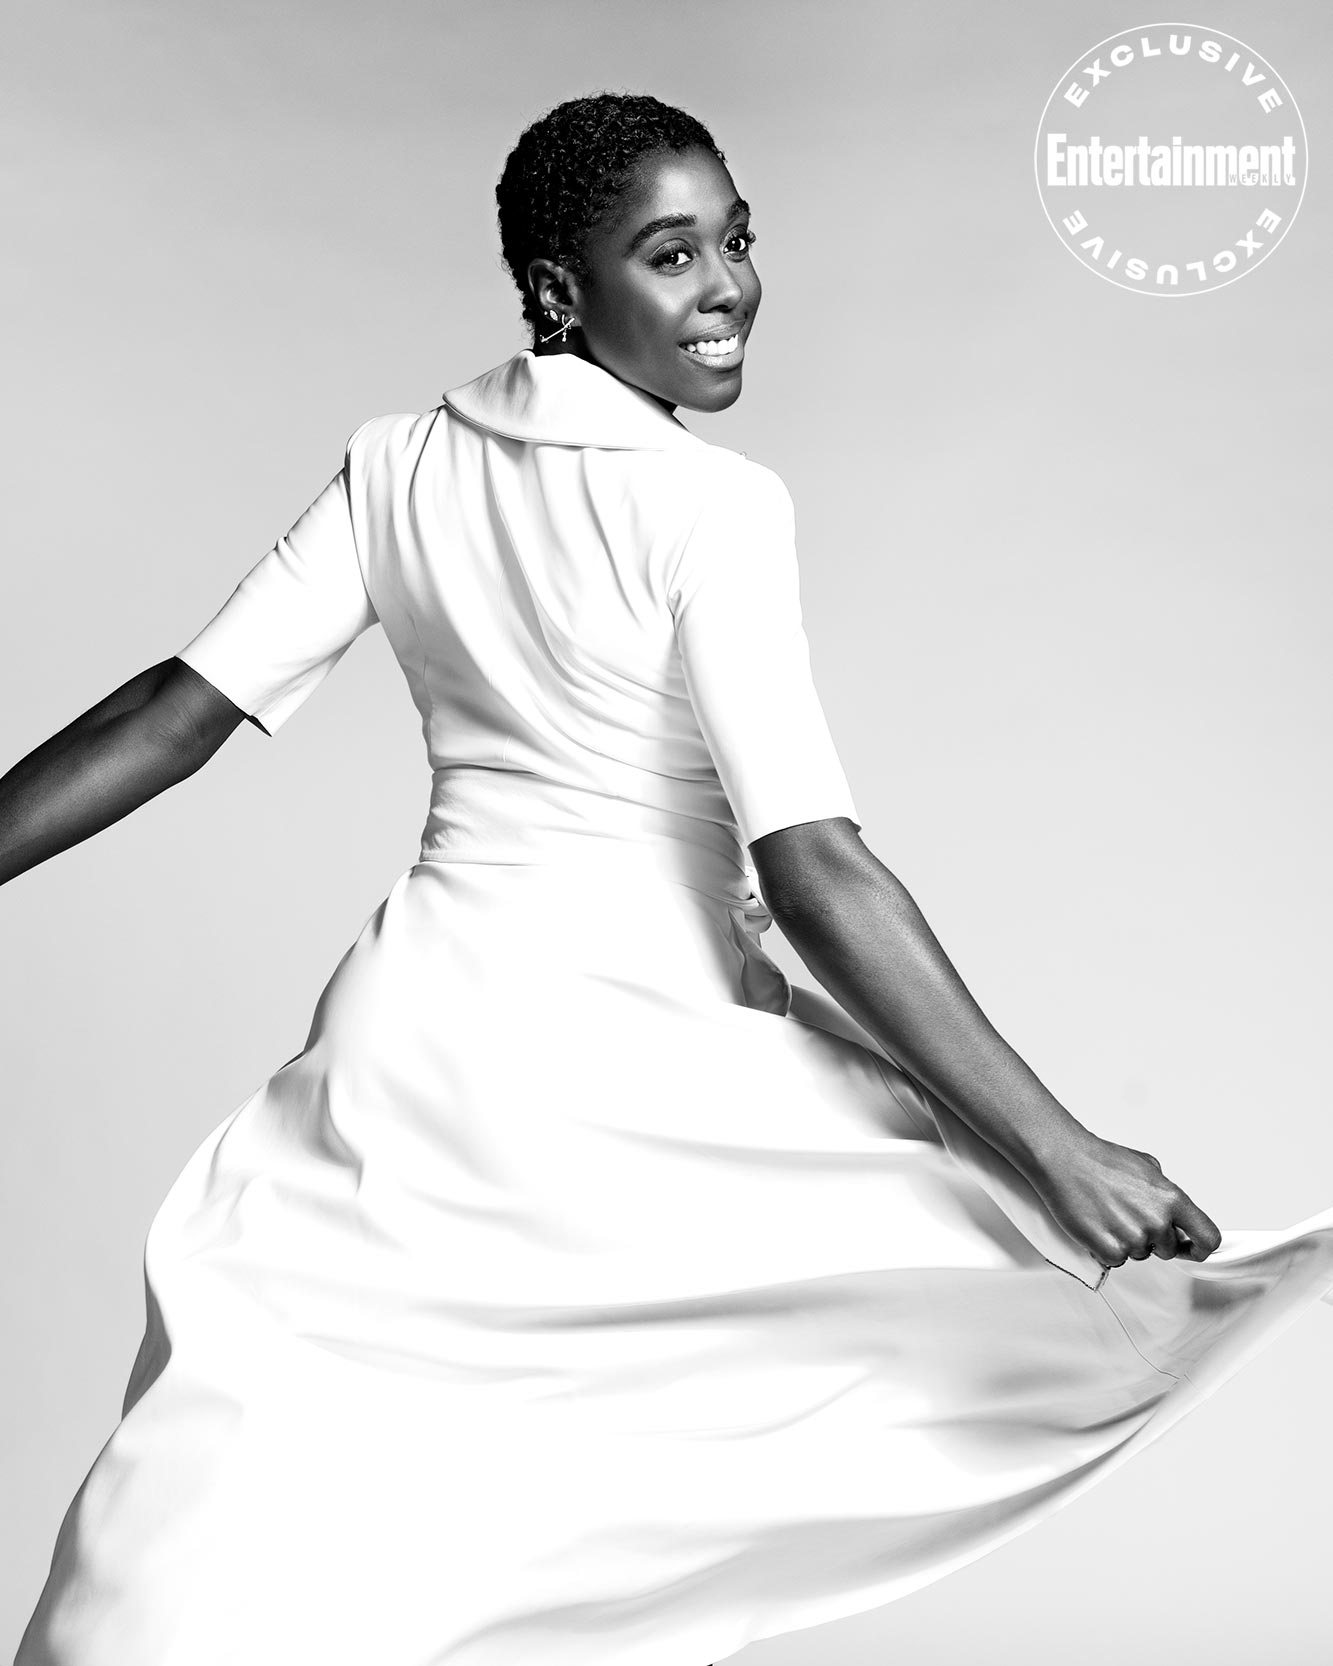 Lashana Lynch As Nomi No Time To Die Wallpapers